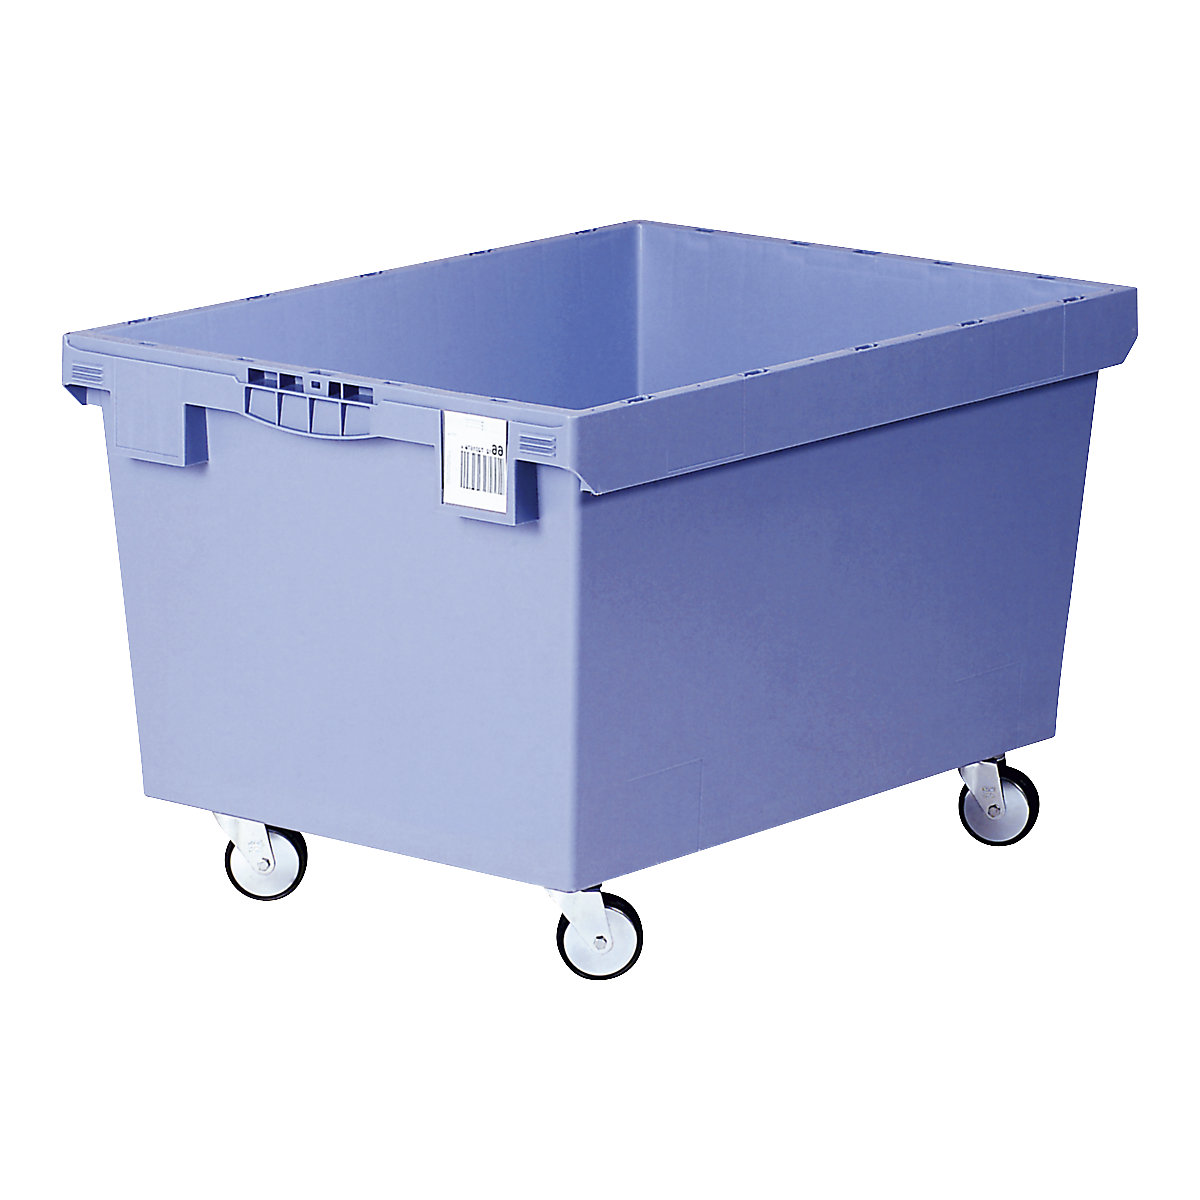 Reusable container with castors - BITO